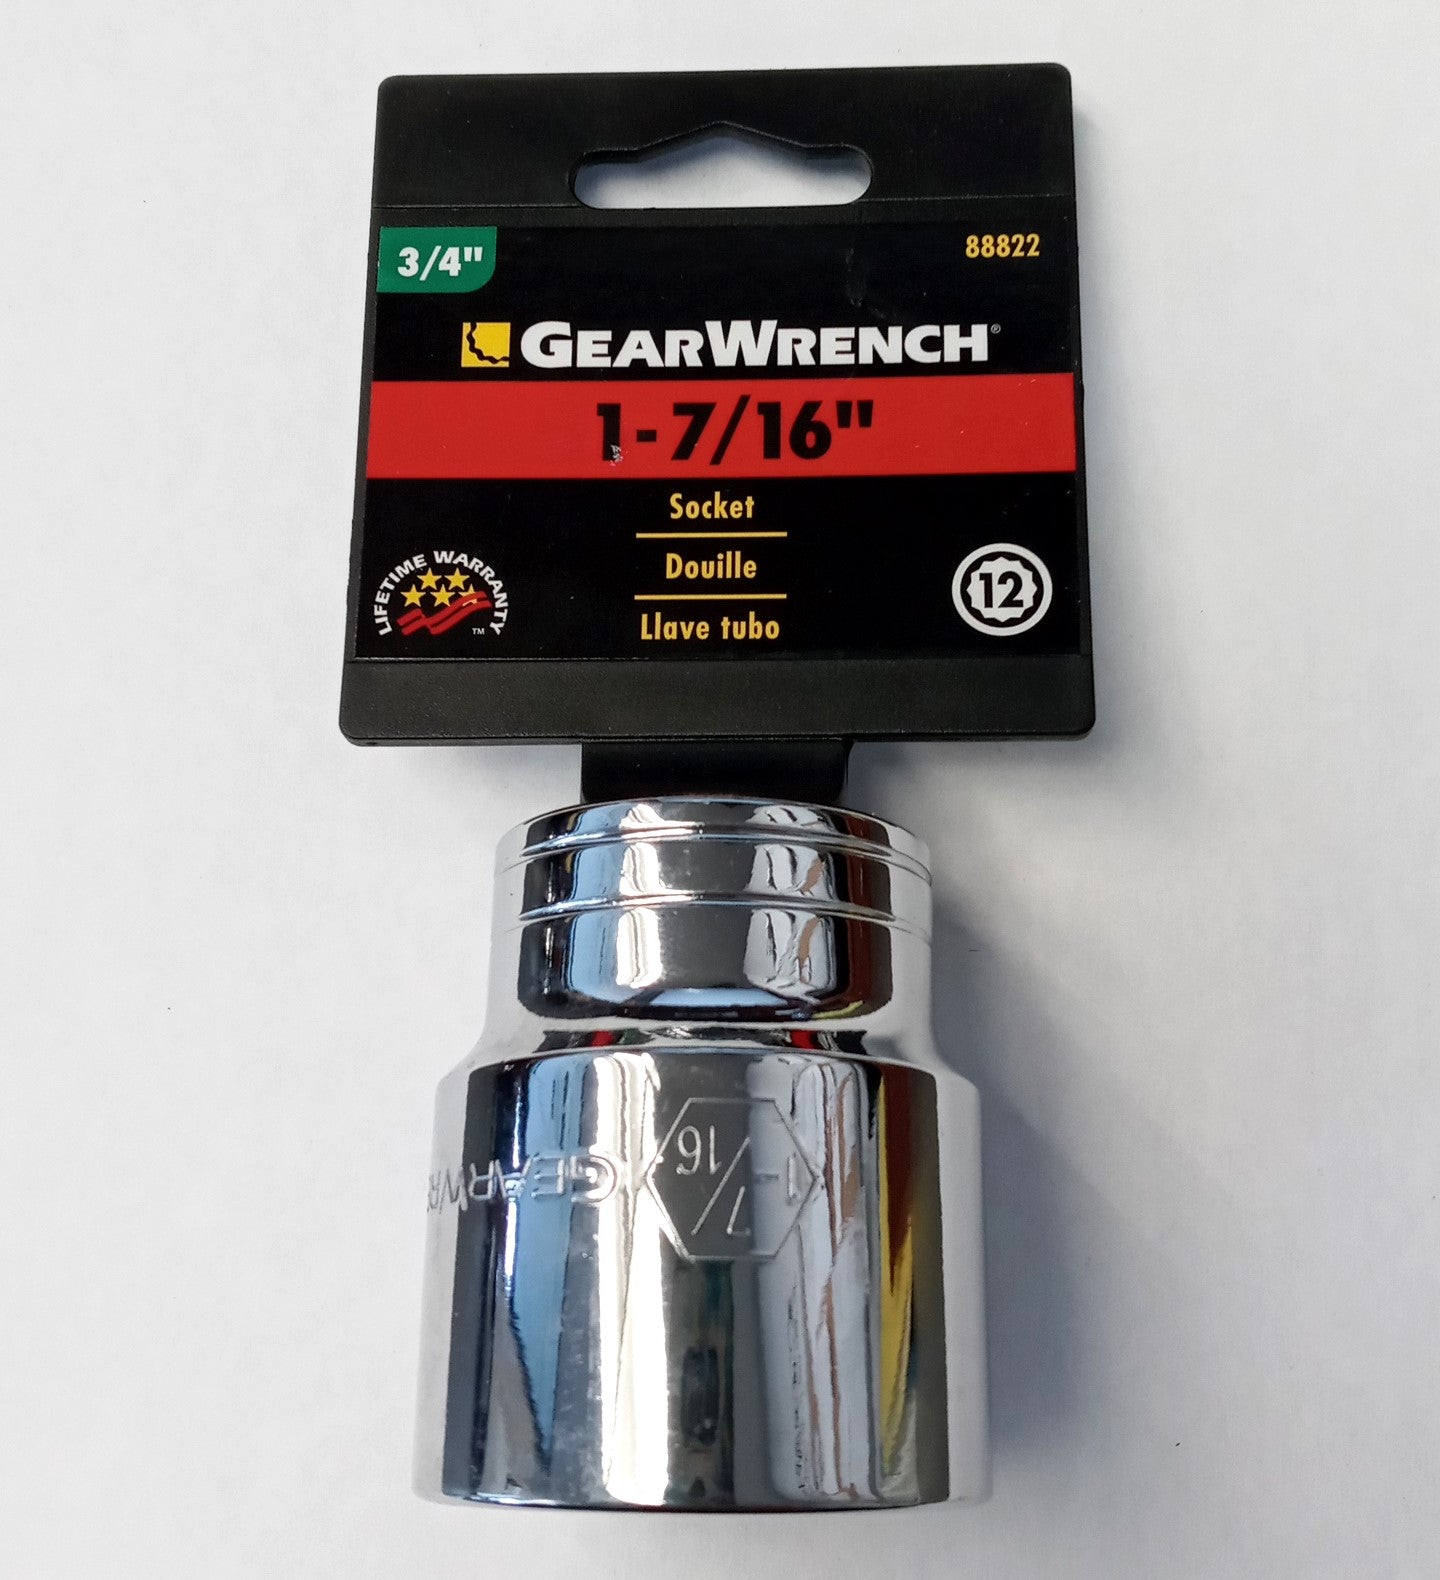 GearWrench 88822 3/4" Drive 1-7/16" Socket 12 Point